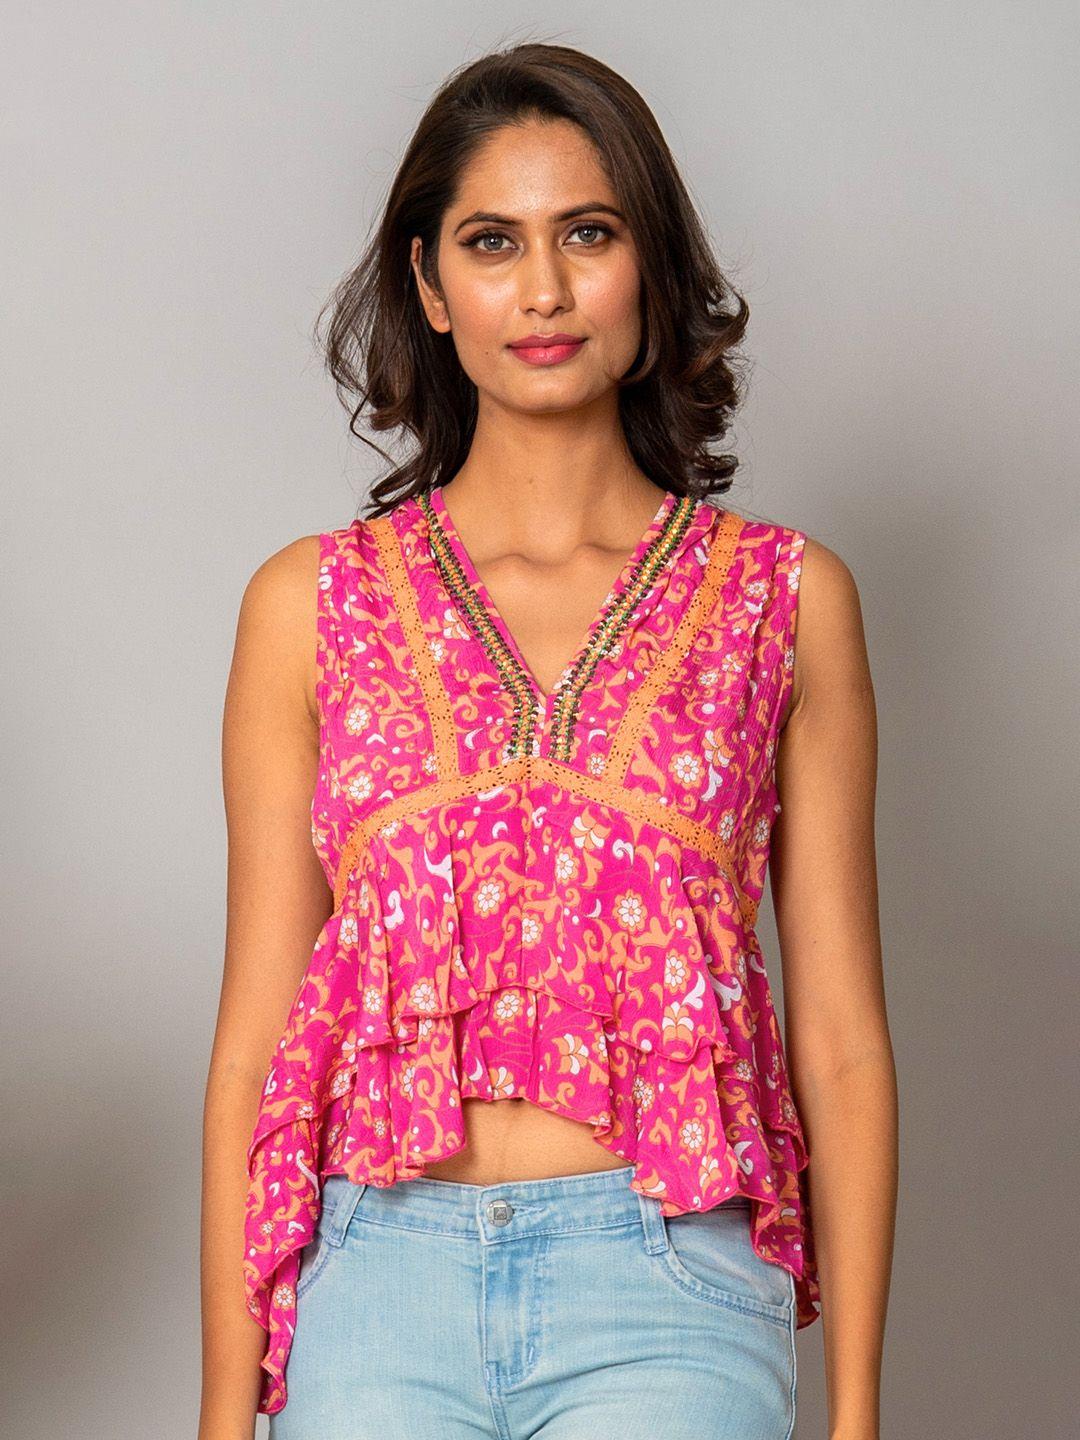 westified pink floral print chiffon top